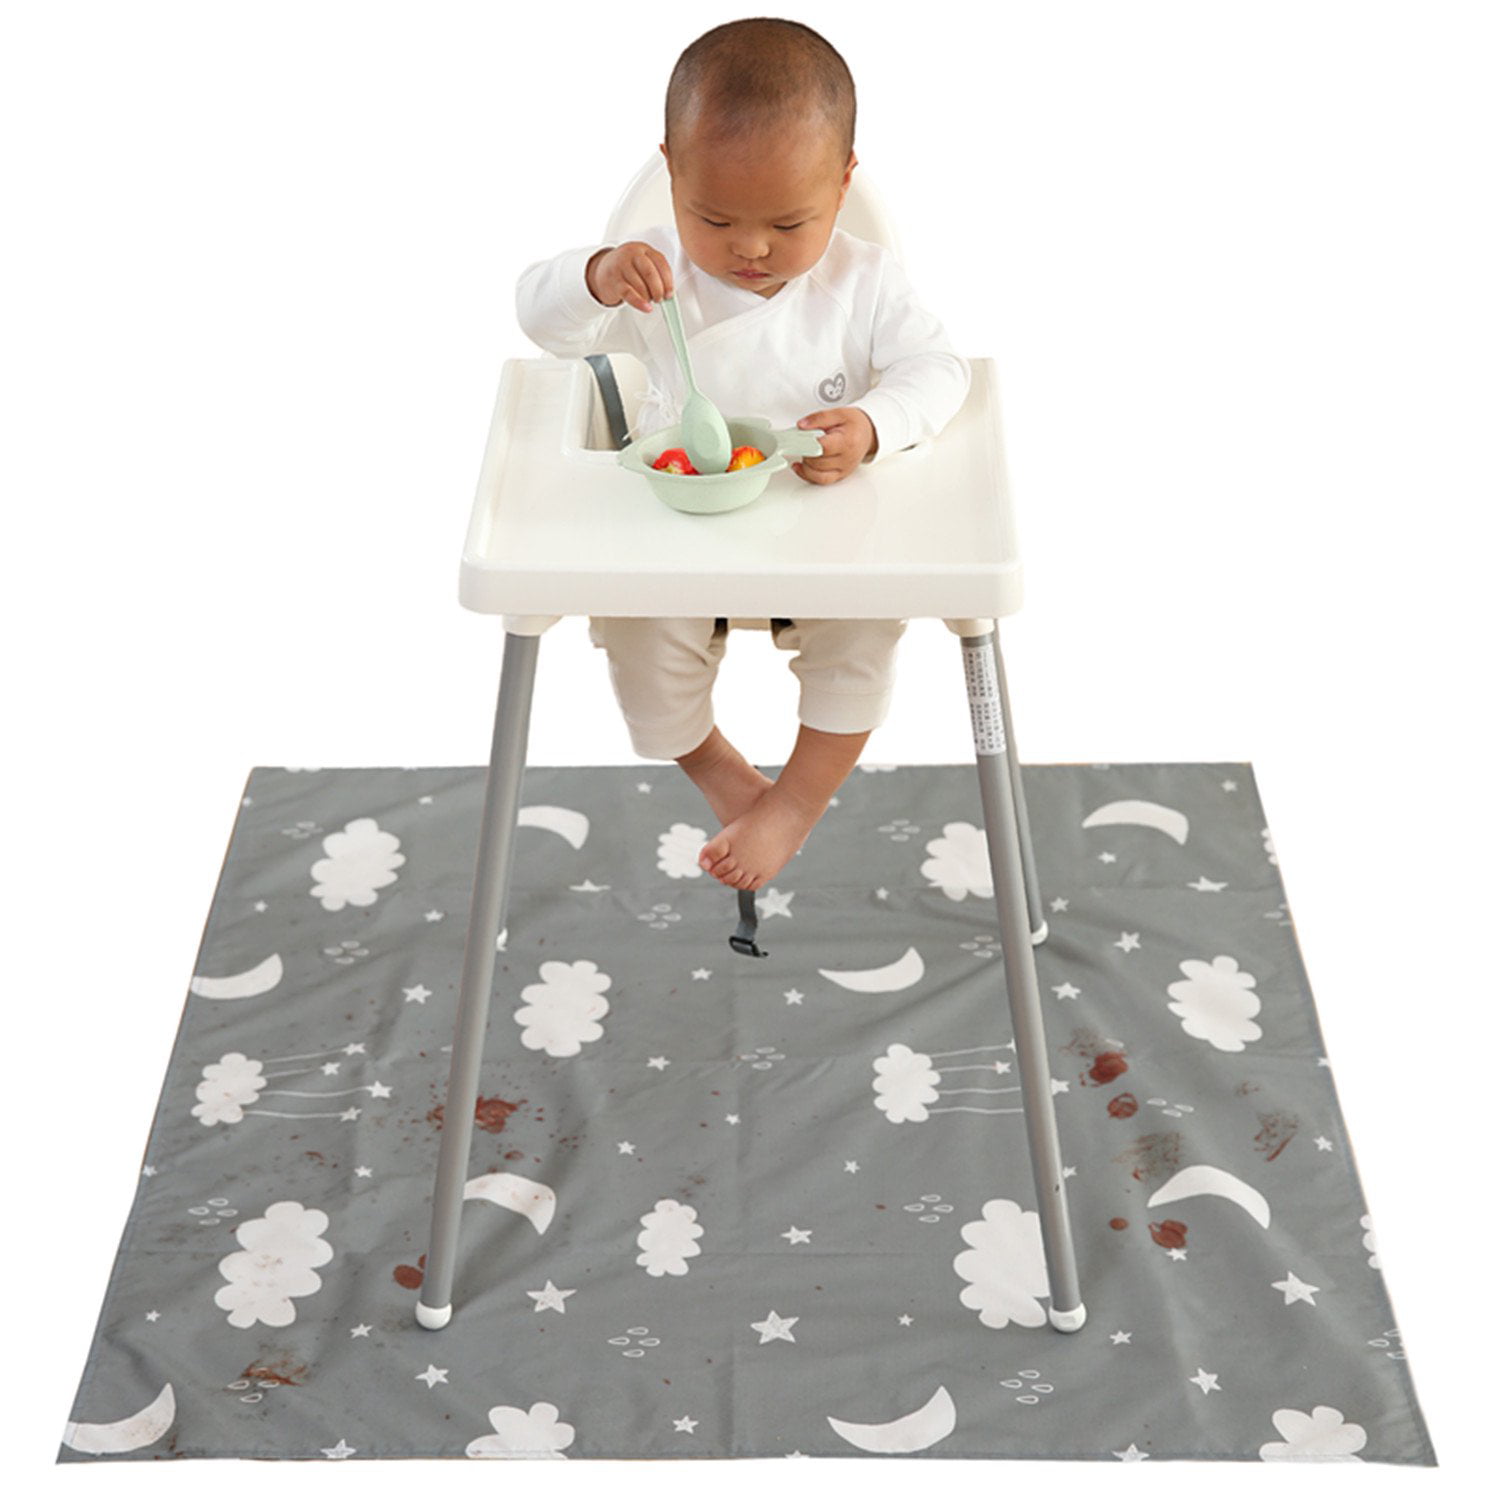 Plus Signs Waterproof Spill Mat for Pets Washable Play Mat 54 Large ReignDrop Splat Mat for High Chair Arts Portable Crafts for Baby Picnic Non Slip Durable Kids Reusable Splash 